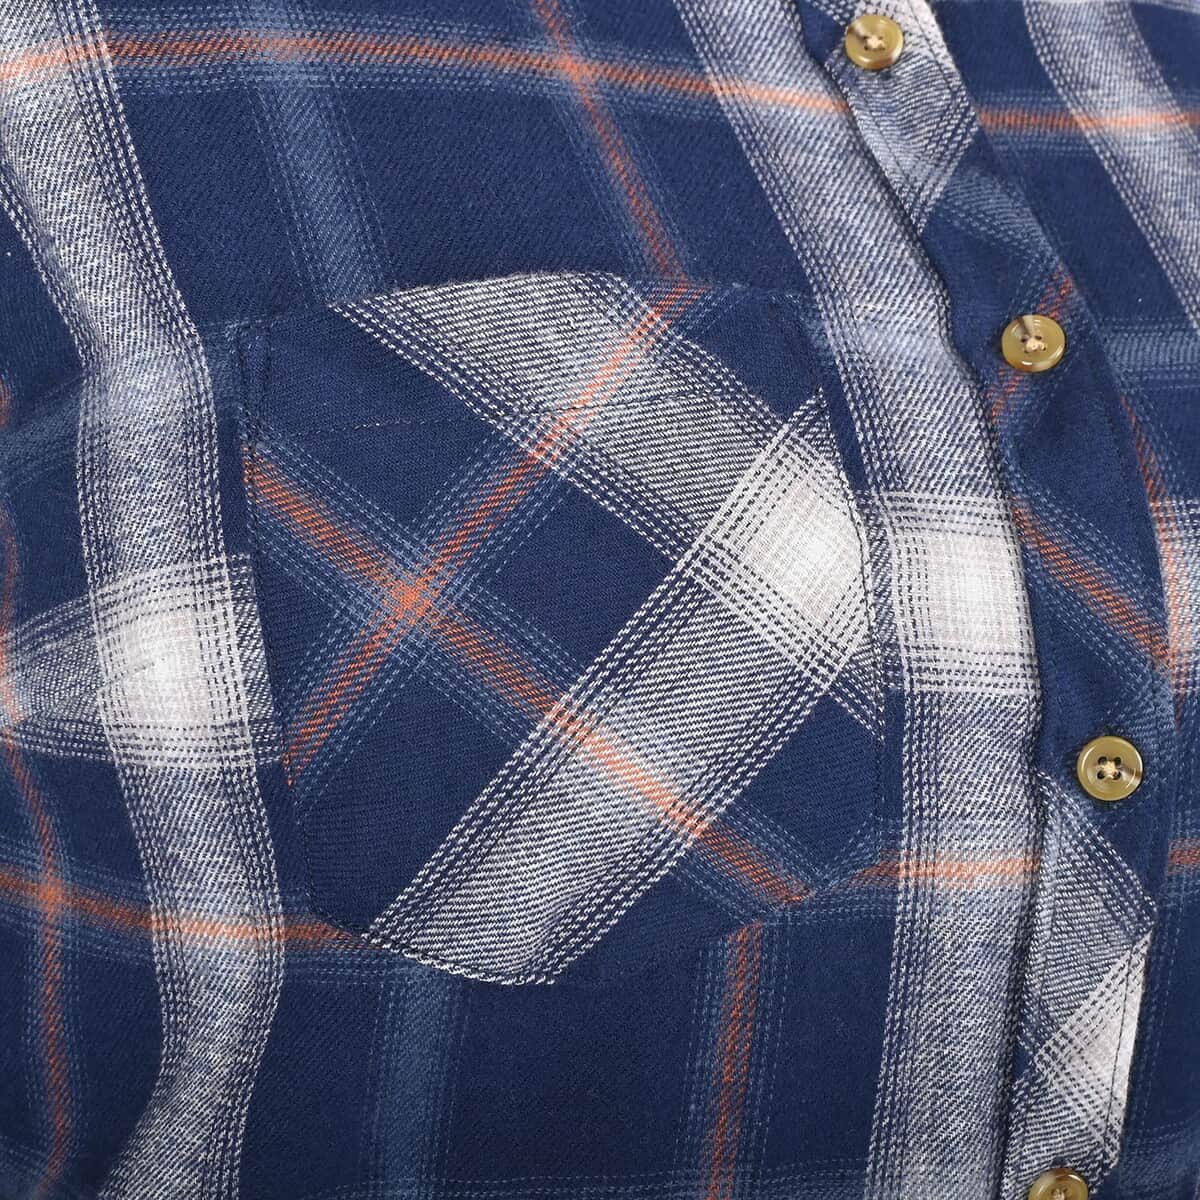 Victory Sportswear Blue and White Plaid Pattern Cotton Flannel Shirt - L image number 5